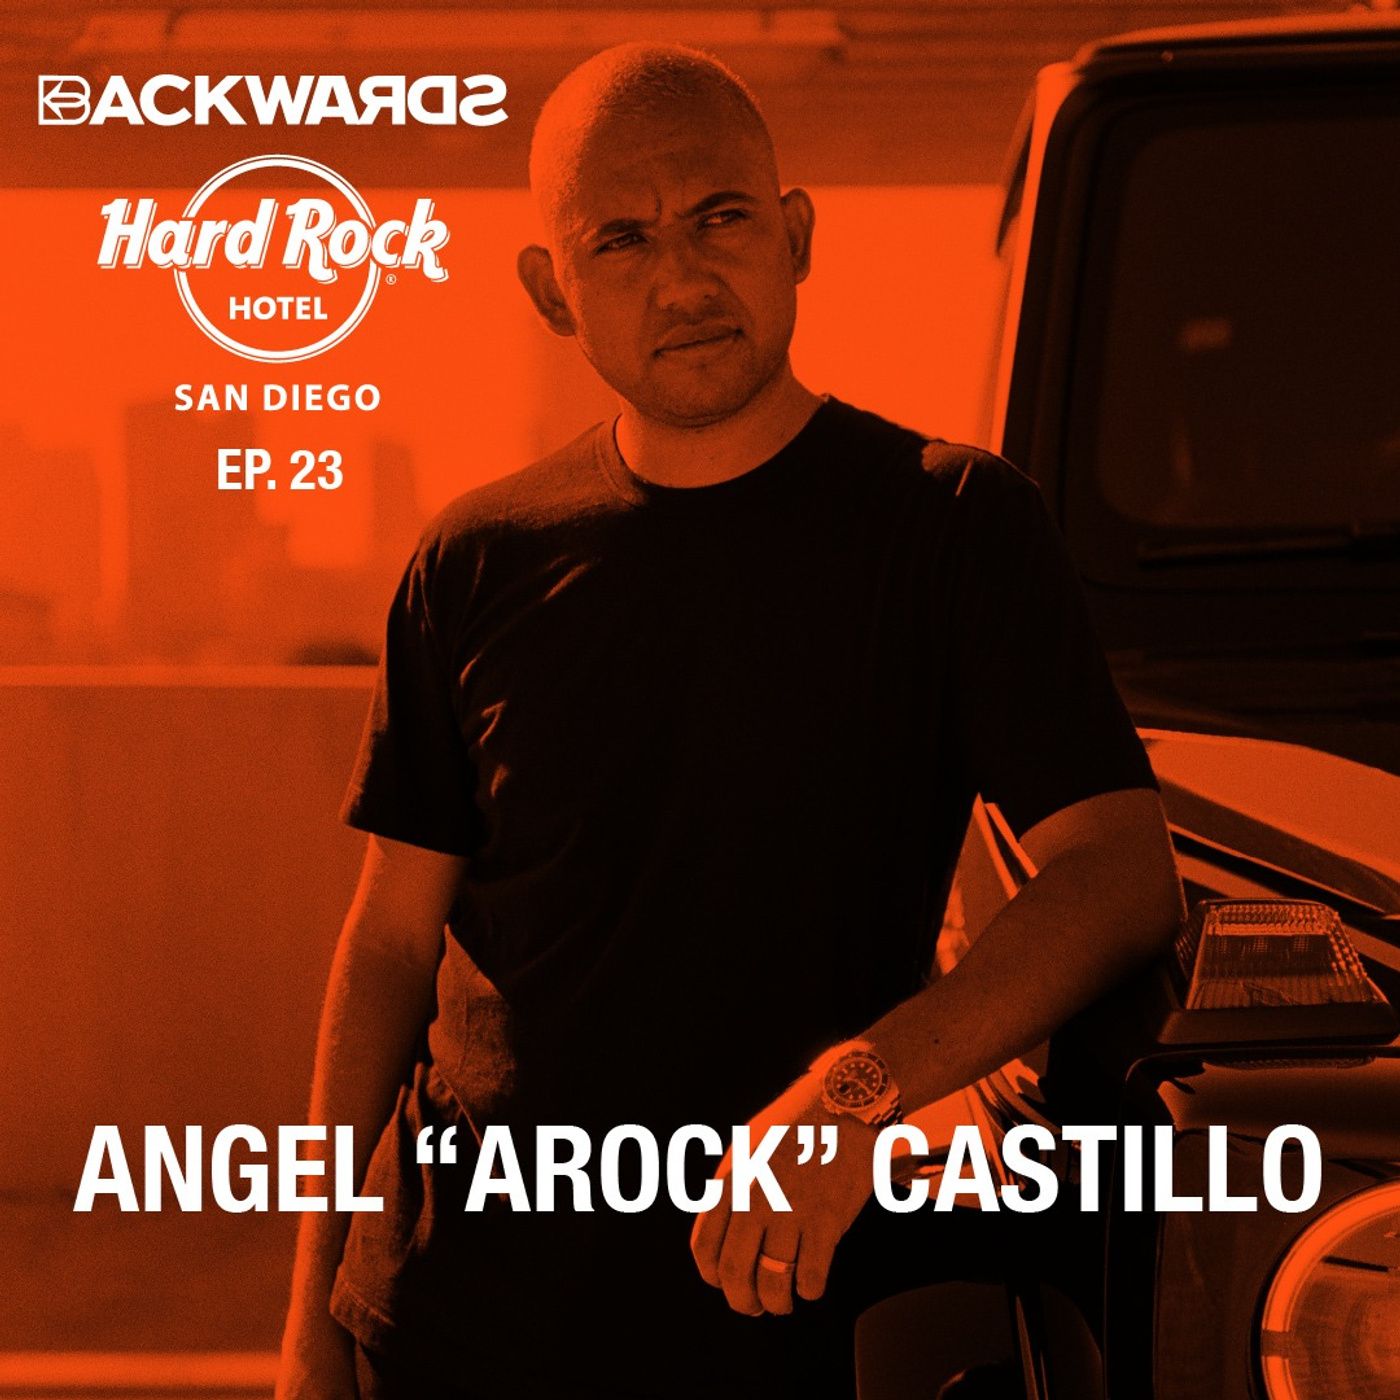 Interview with Angel "AROCK" Castillo Image